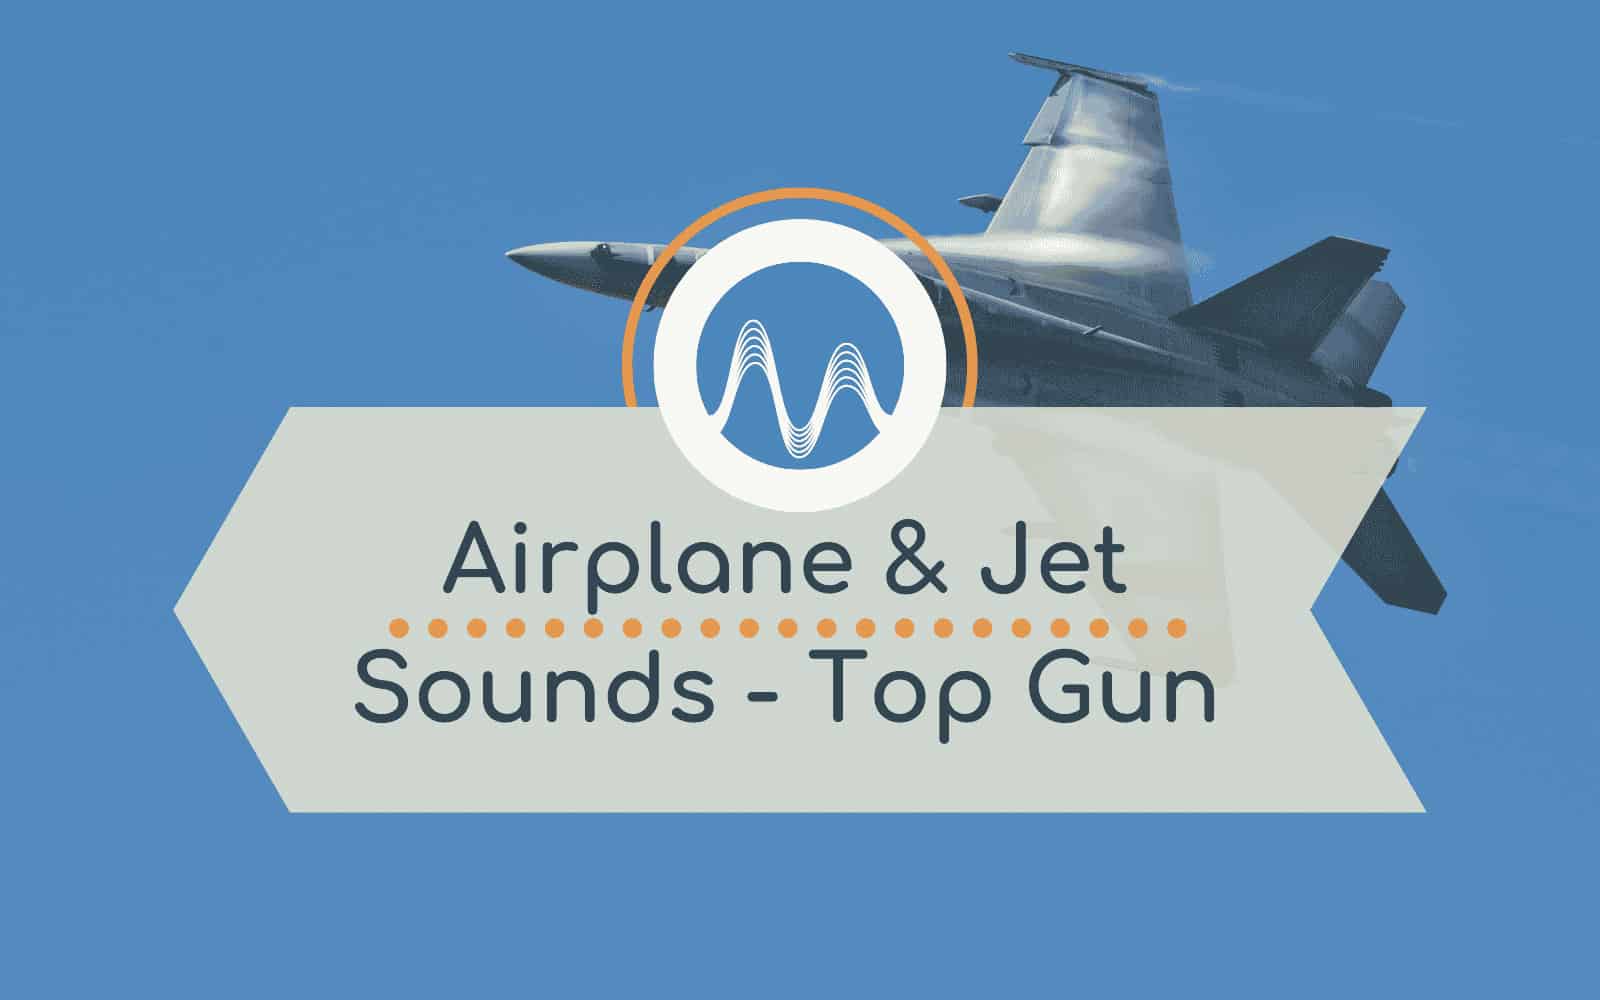 Airplane & Jet Sounds – Top Gun Sound Effects Free Audio Production Tools airplane sounds Music Radio Creative